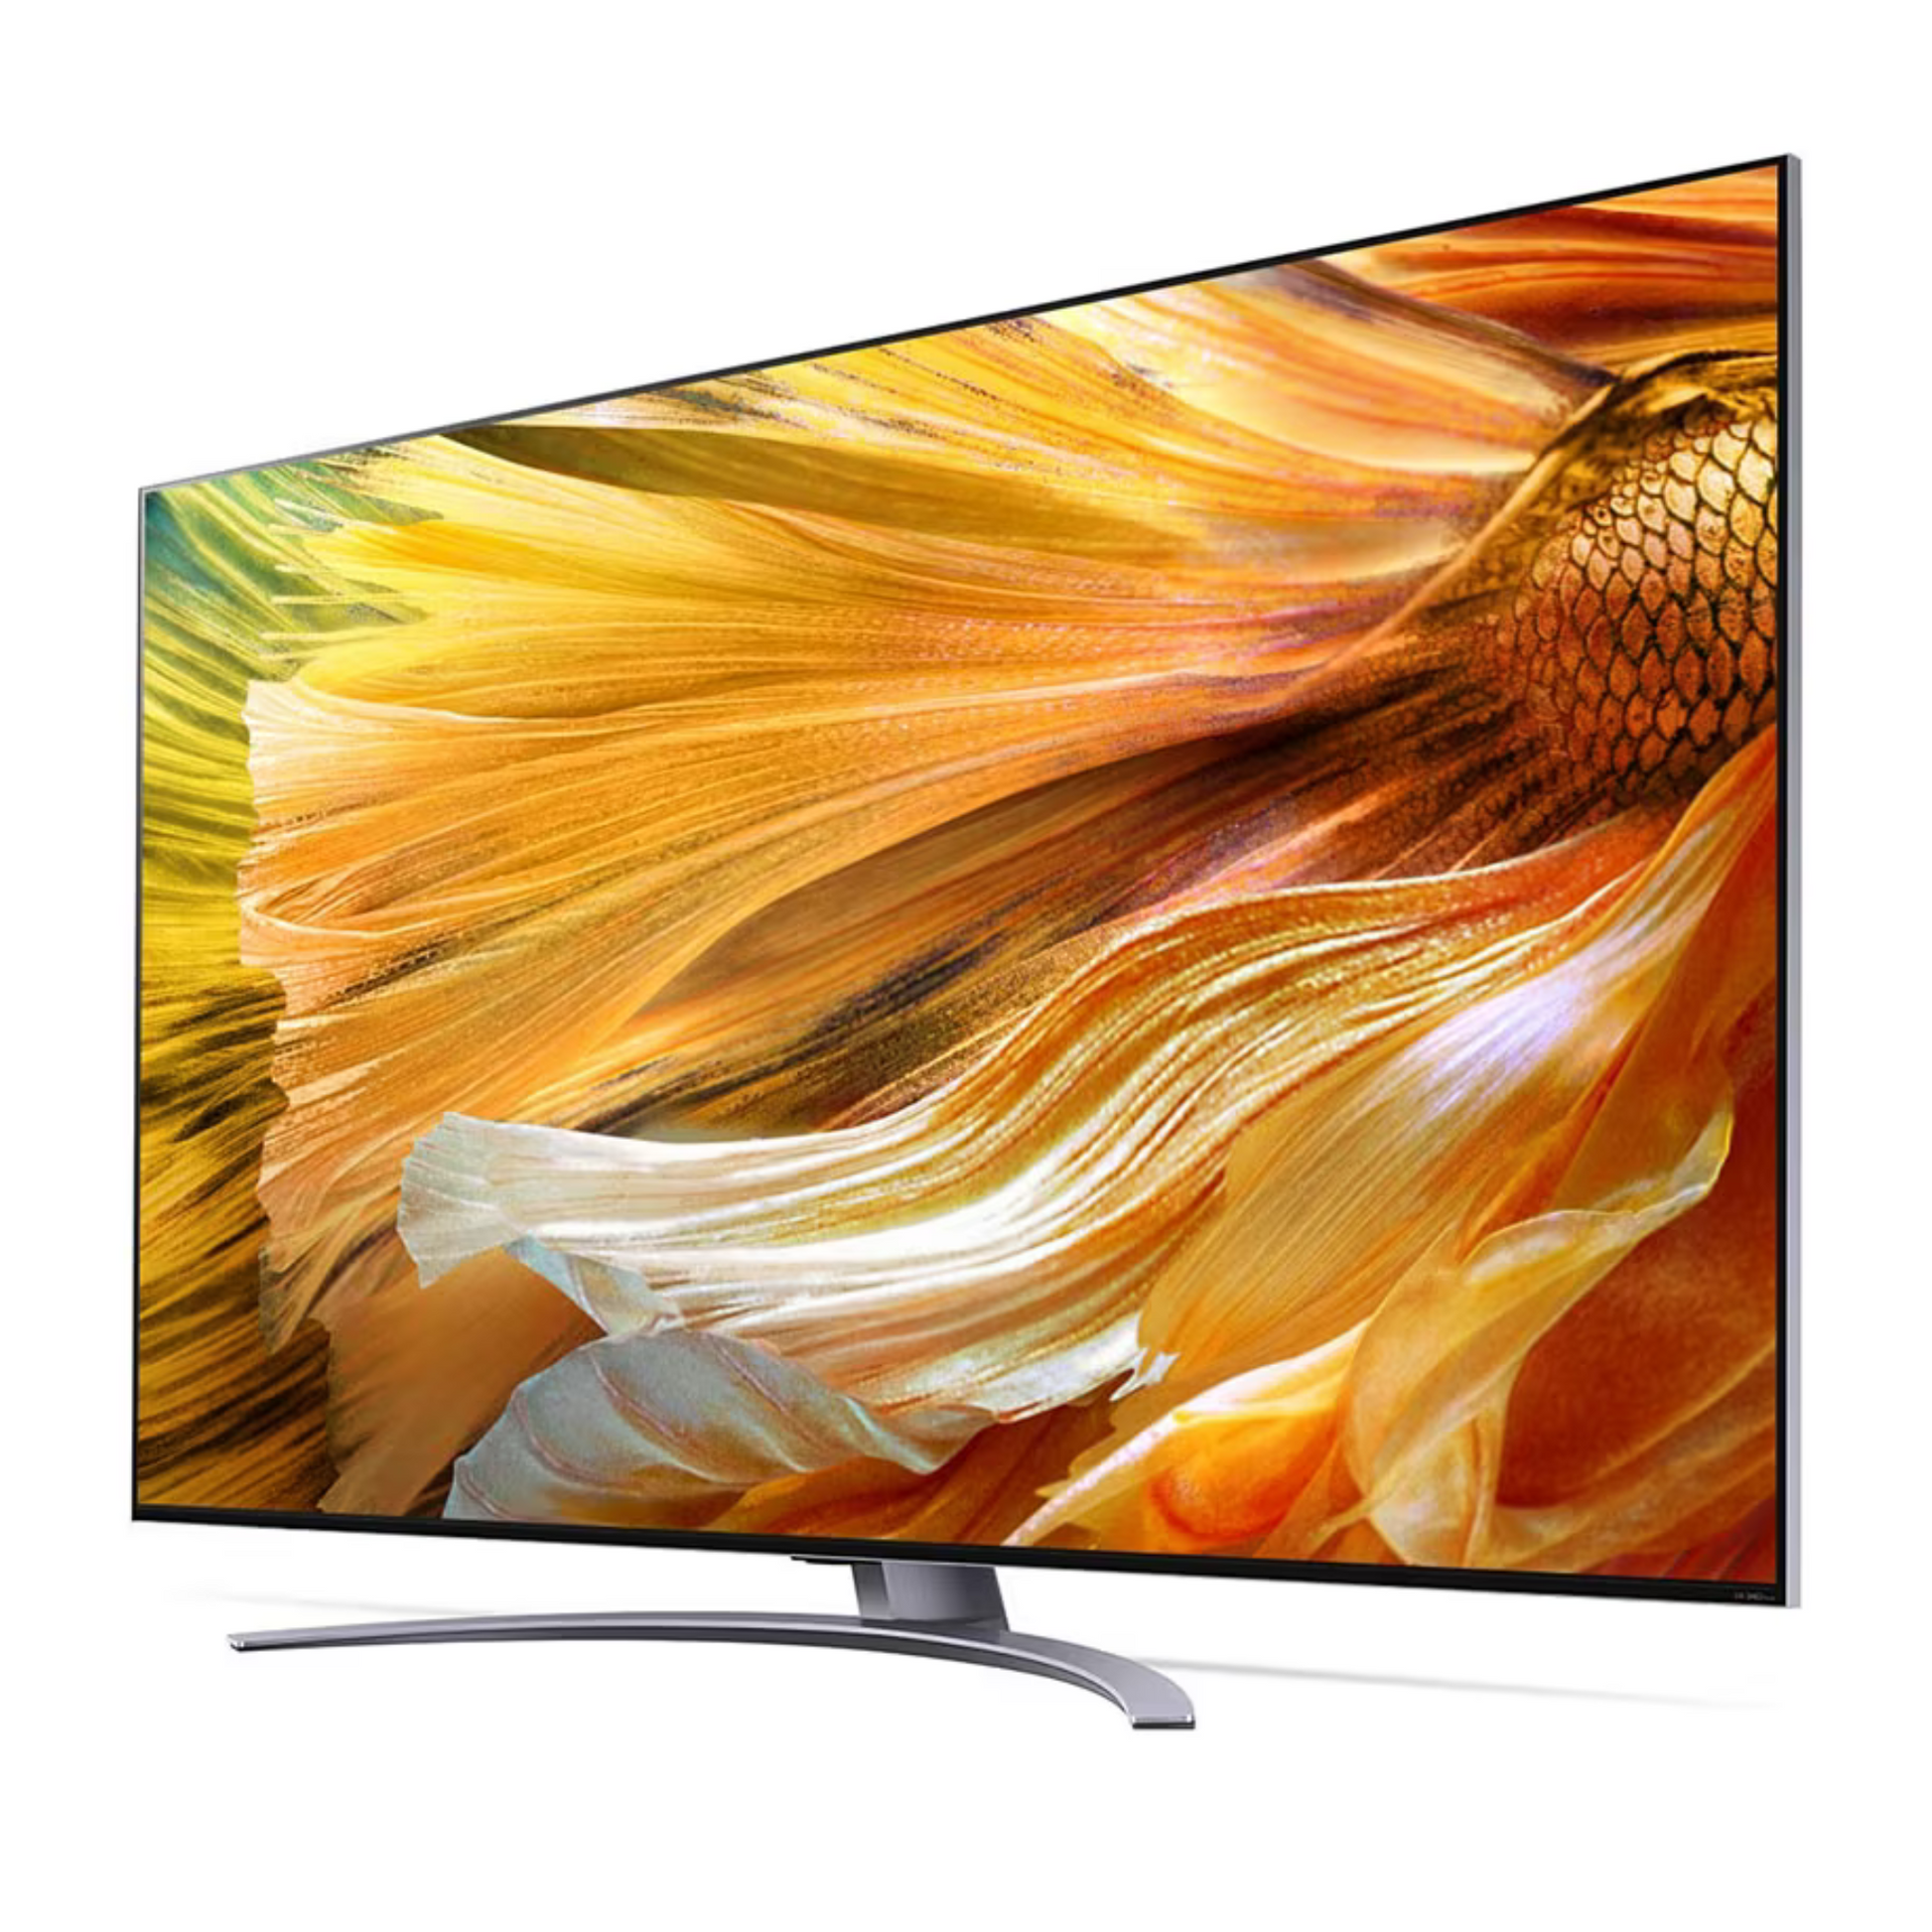 LG 75 inch Smart QNED TV - 4K, 75QNED81